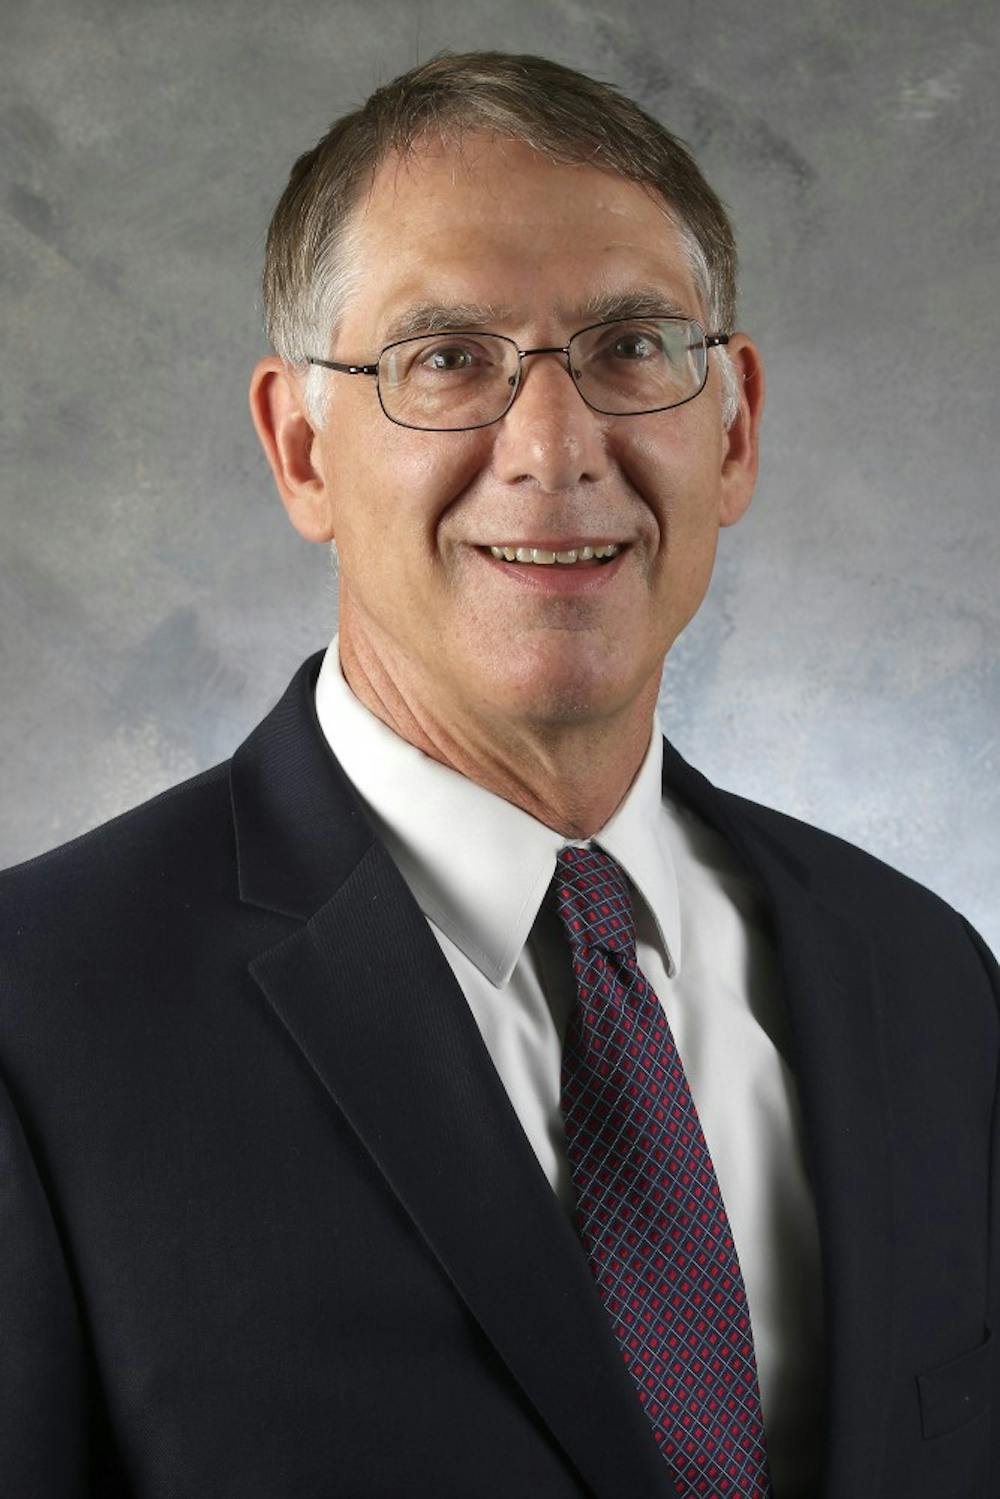 Ball State appoints new dean for Miller College of Business